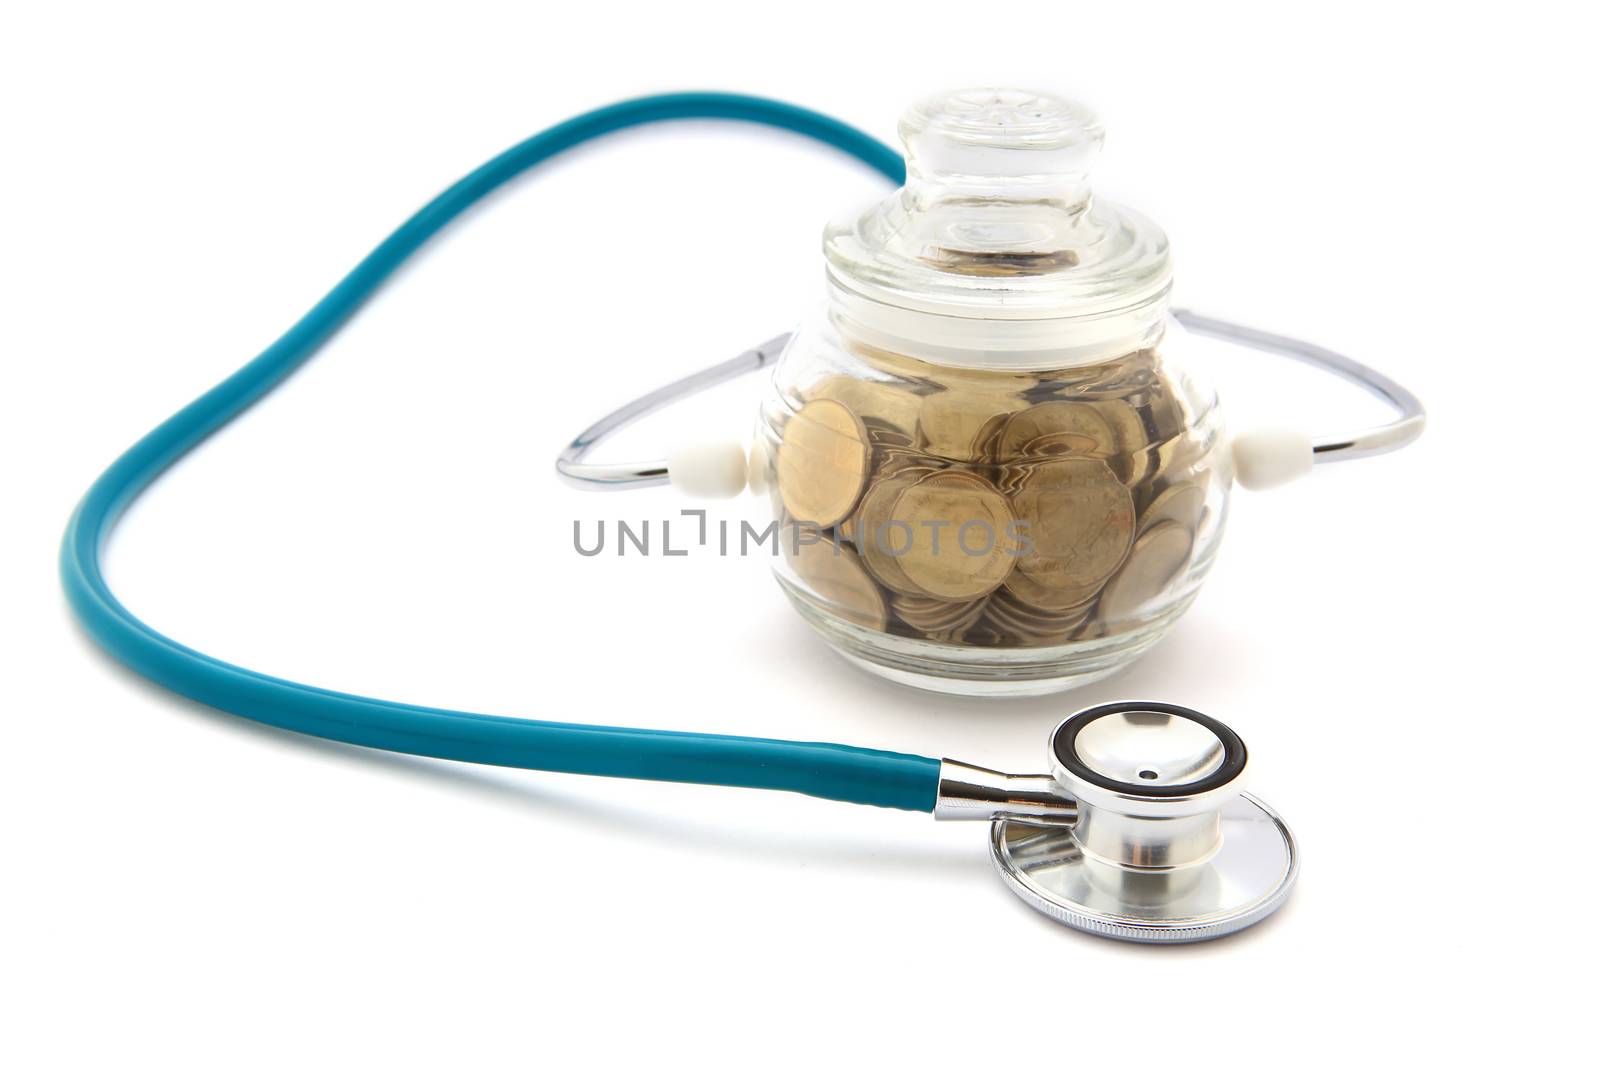 stethoscope with coins in the savings, financial concept